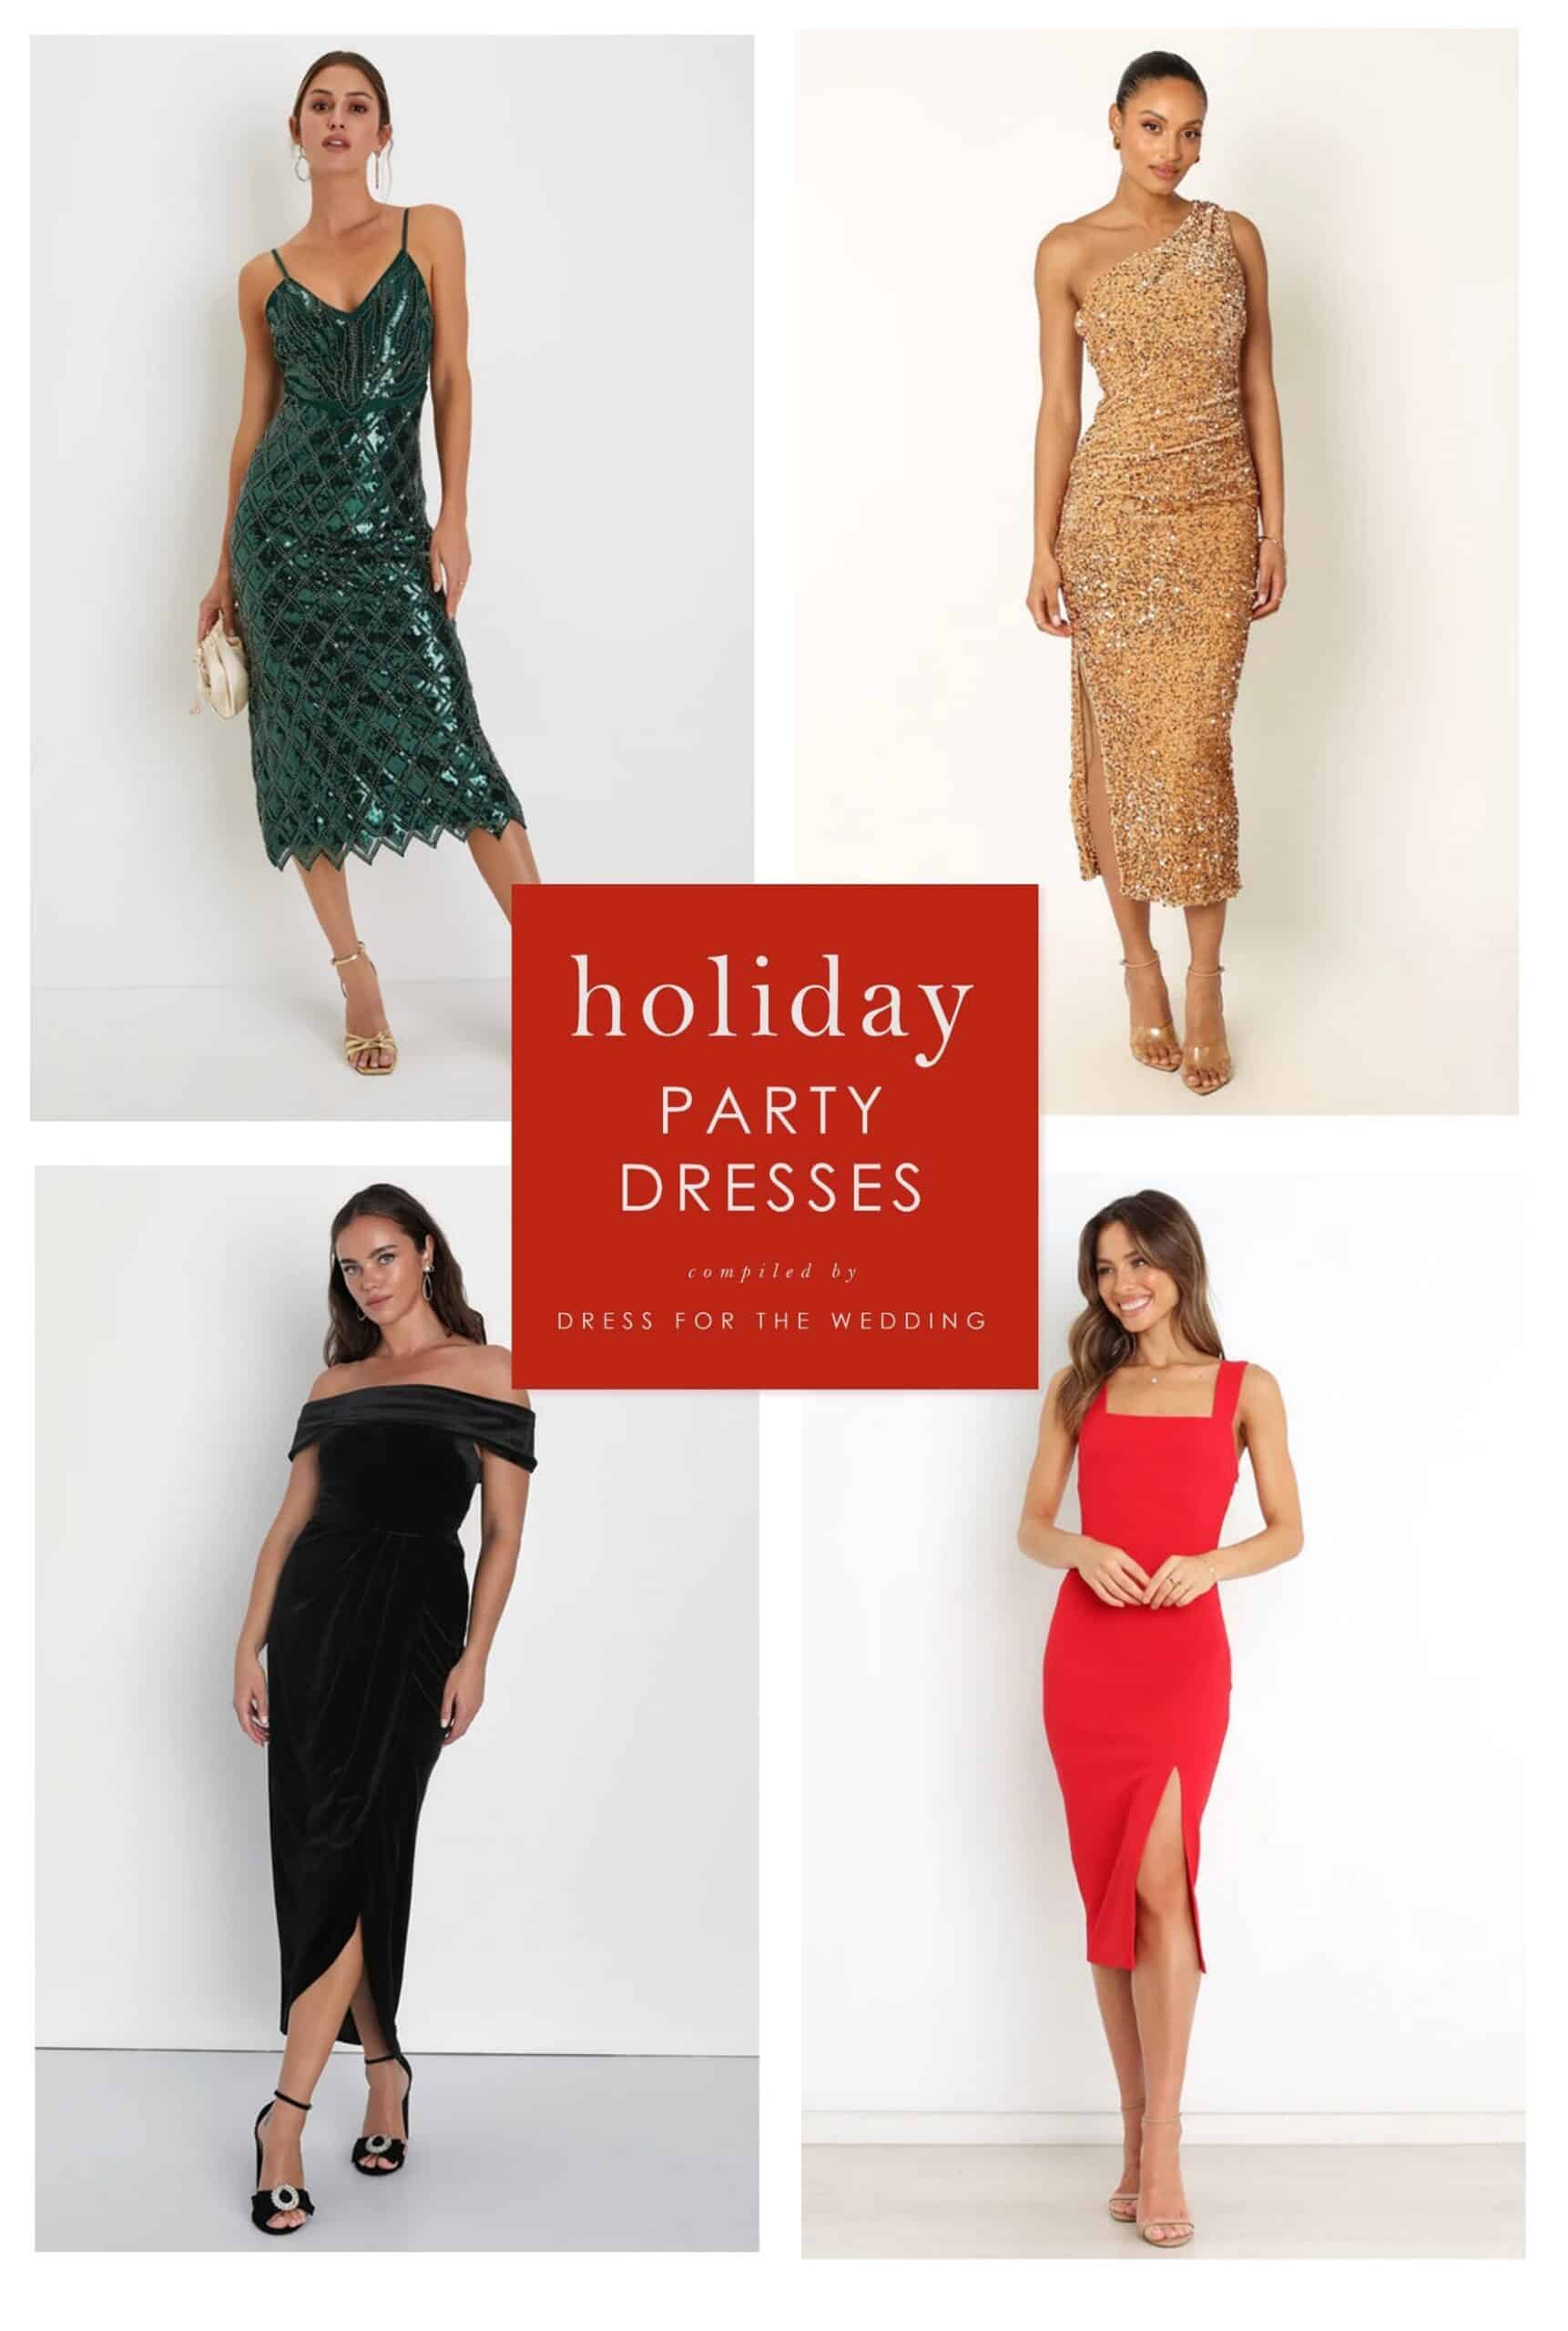 90 of The Best Holiday Party Dresses for The Season- Dress for the